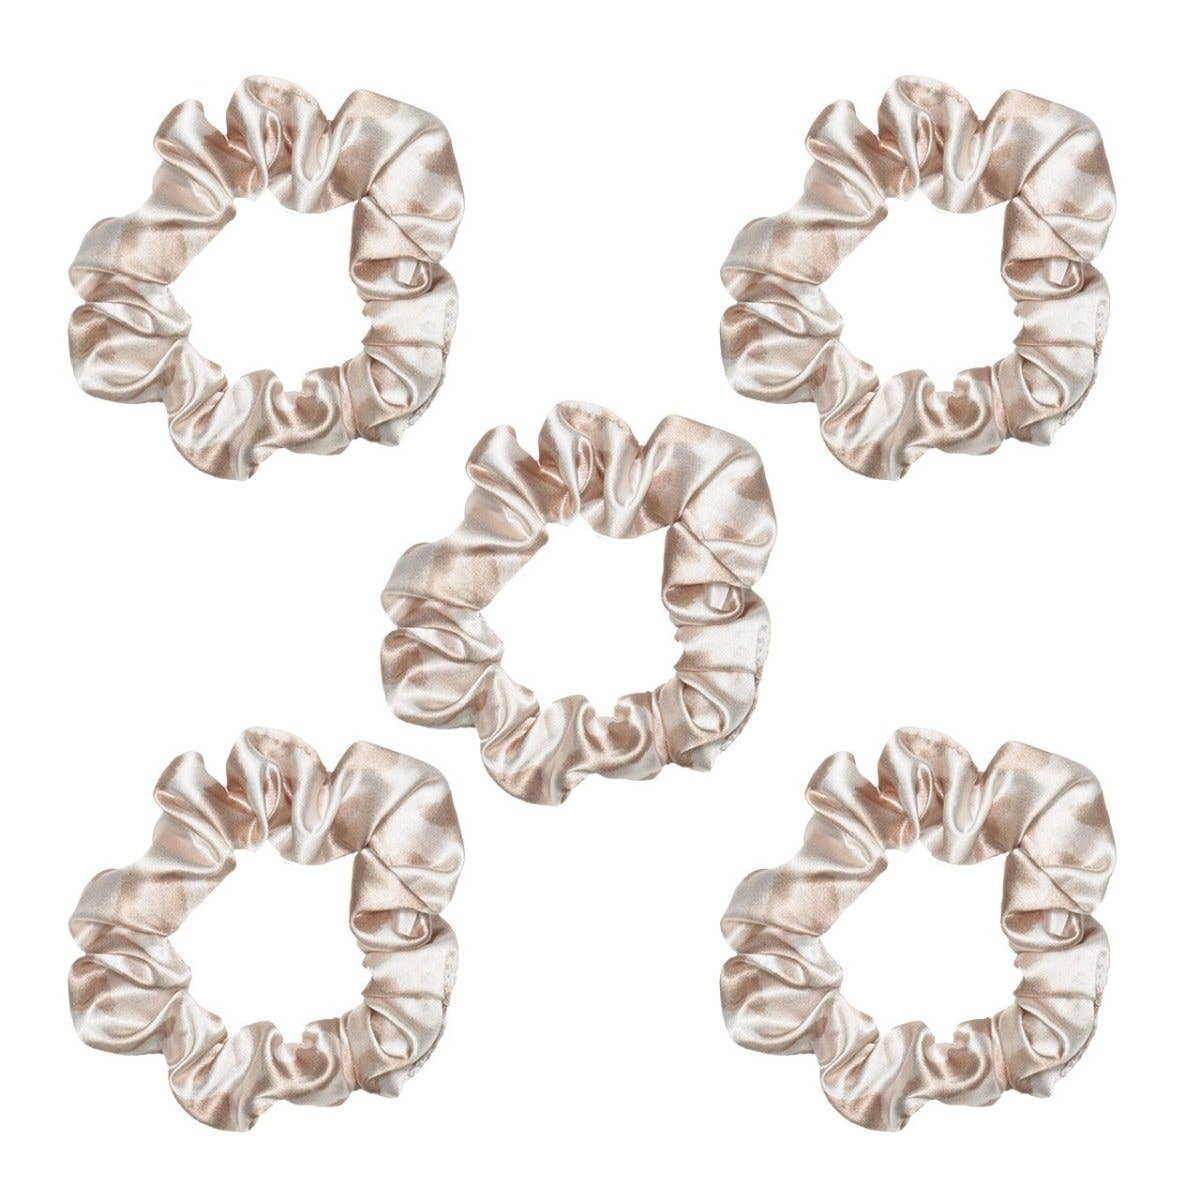 Satin Sleep Scrunchies - The Satin Scrunchie  Ivy and Pearl Boutique   